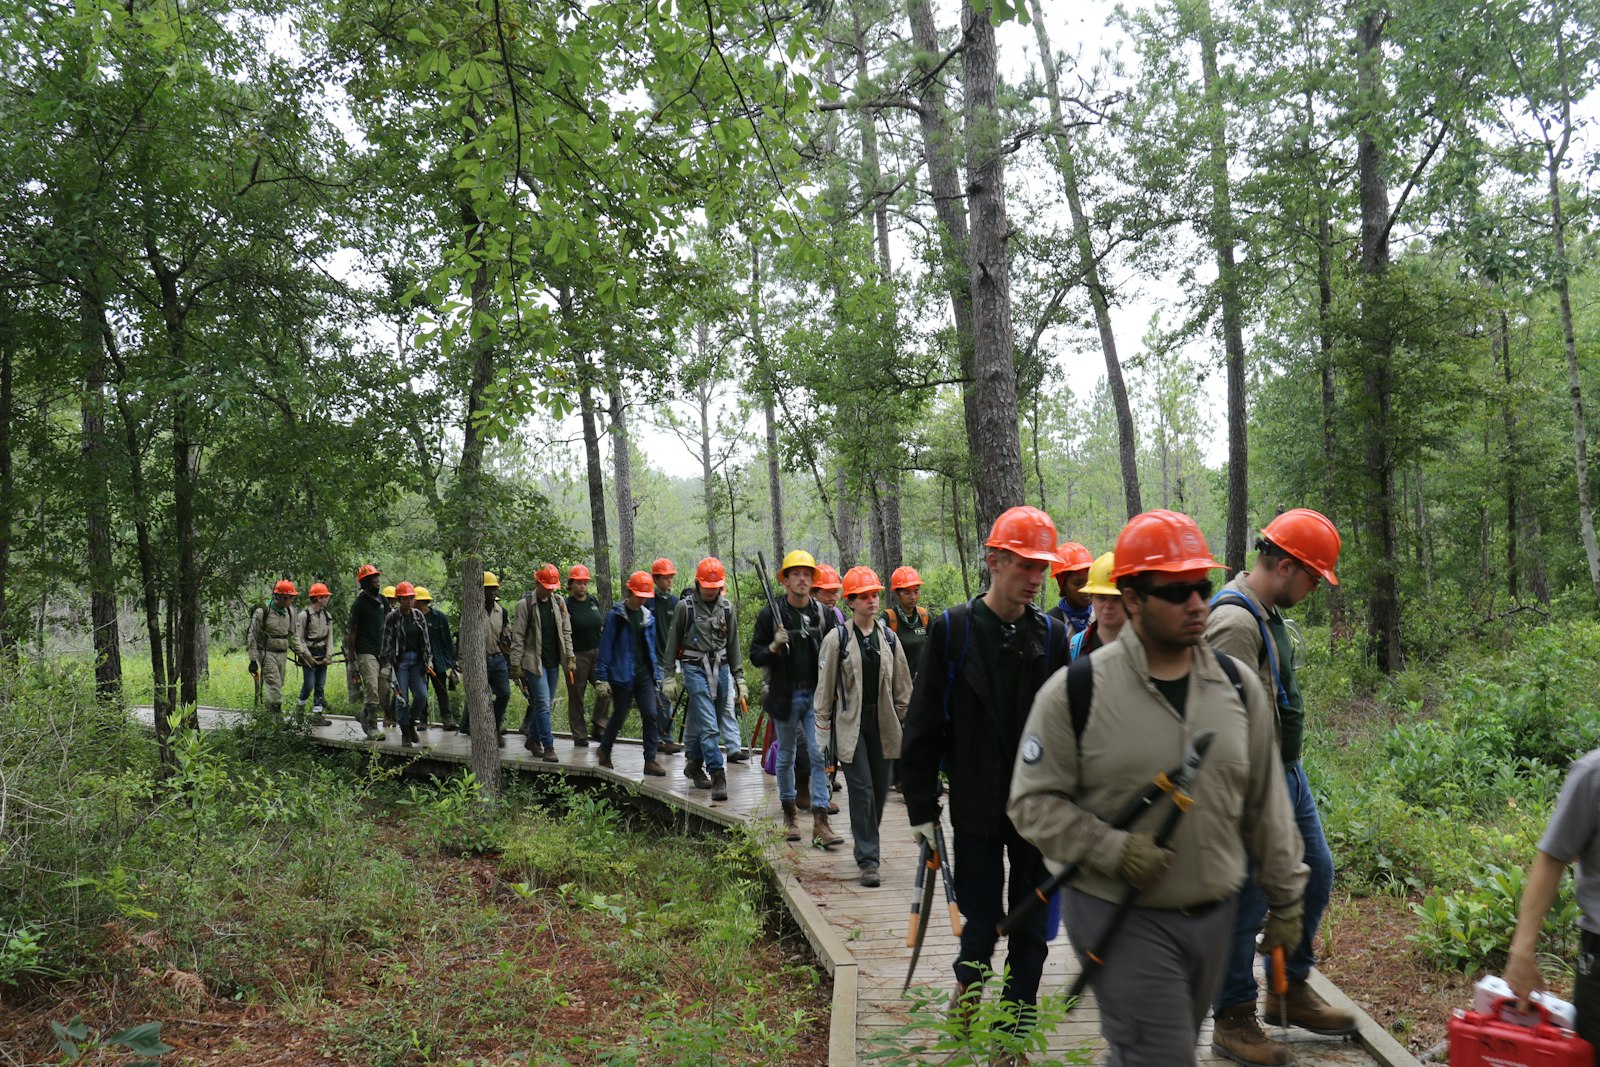 A service corps crew, all in hardhats, walks along an elevated wooden platform through a wood